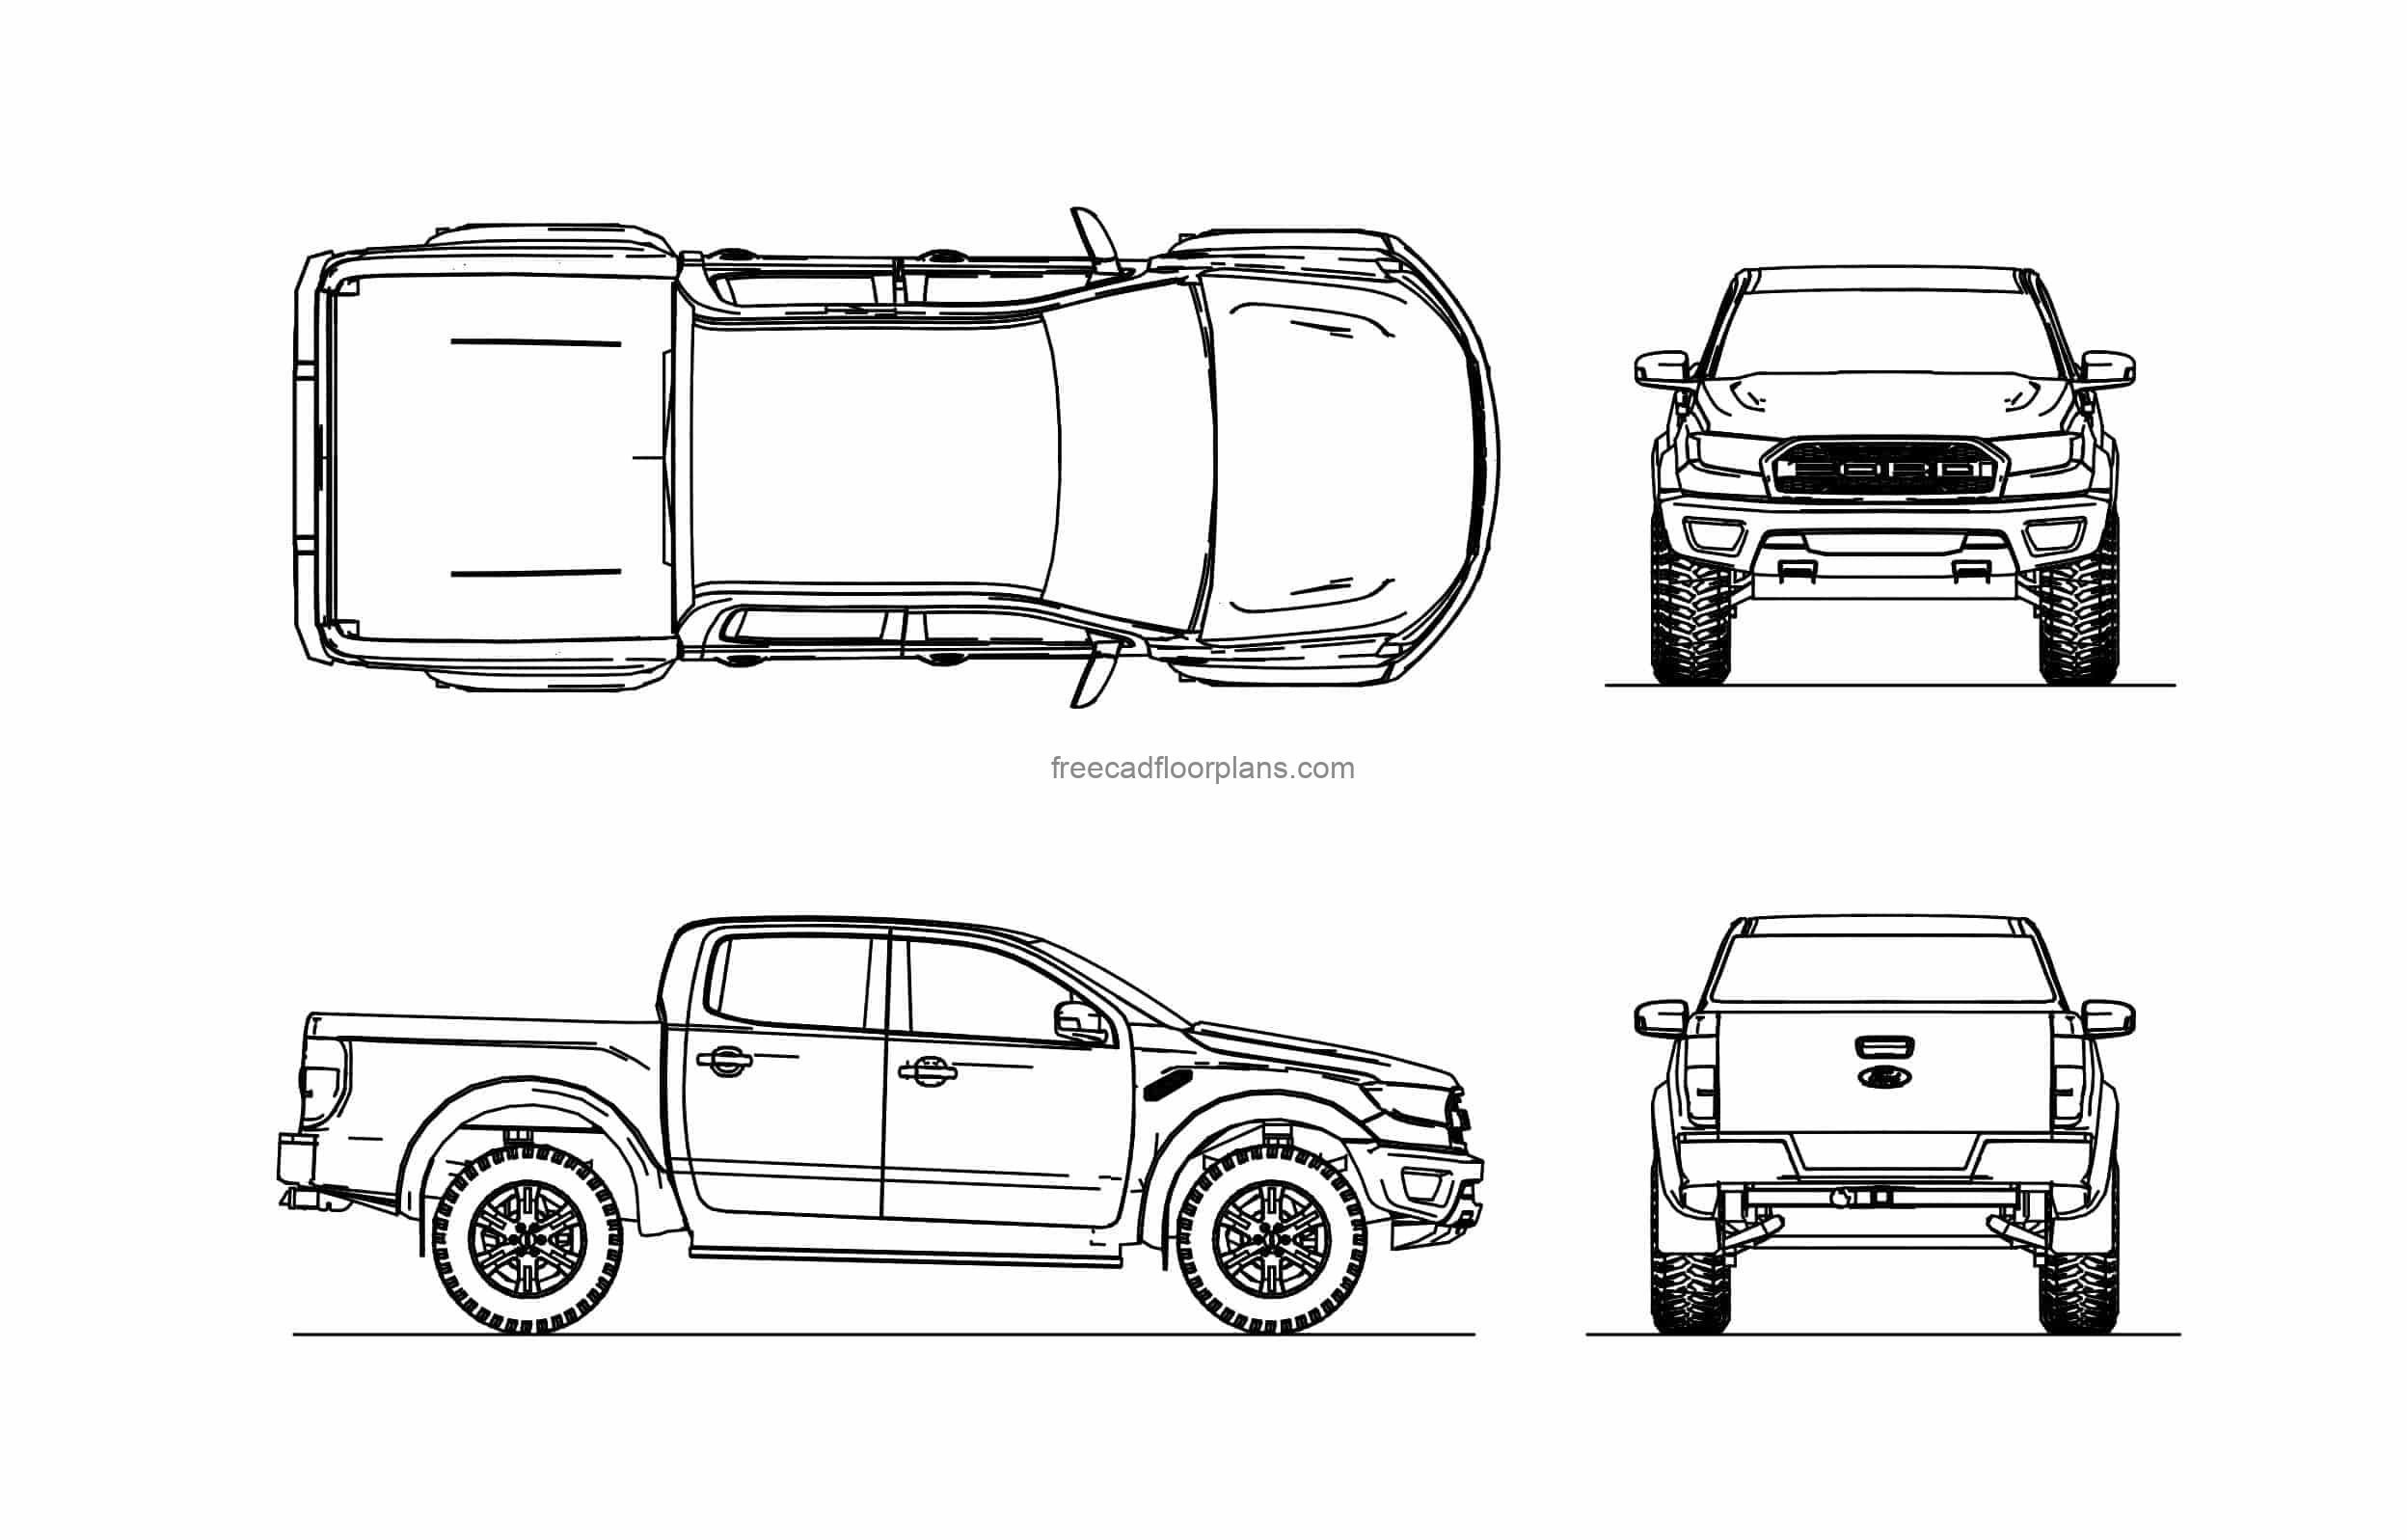 ford raptor truck cad block drawing all 2d views included file for free download